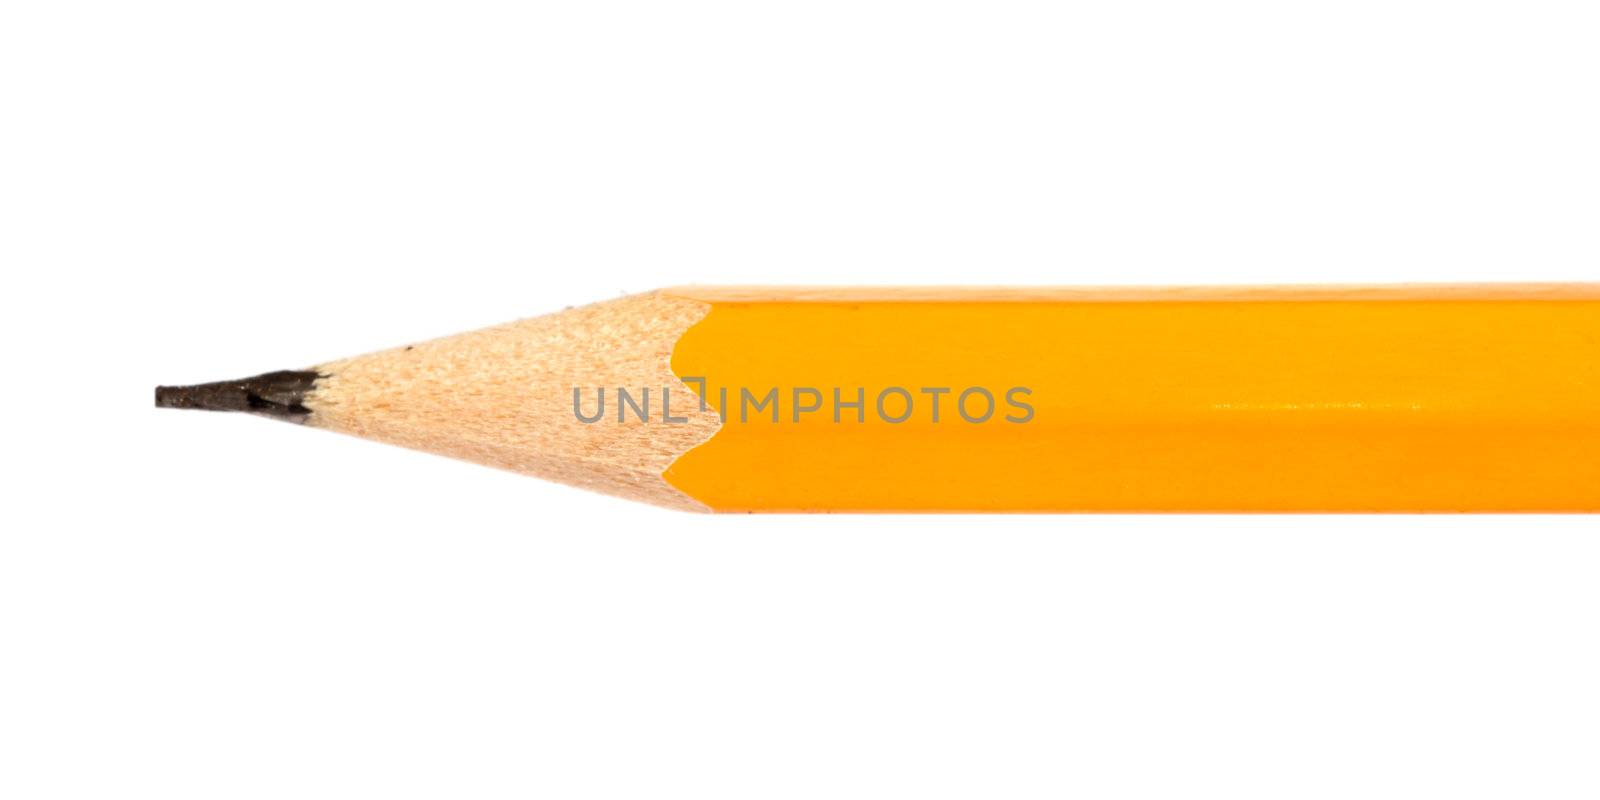 Close-up image of pencil by aguirre_mar